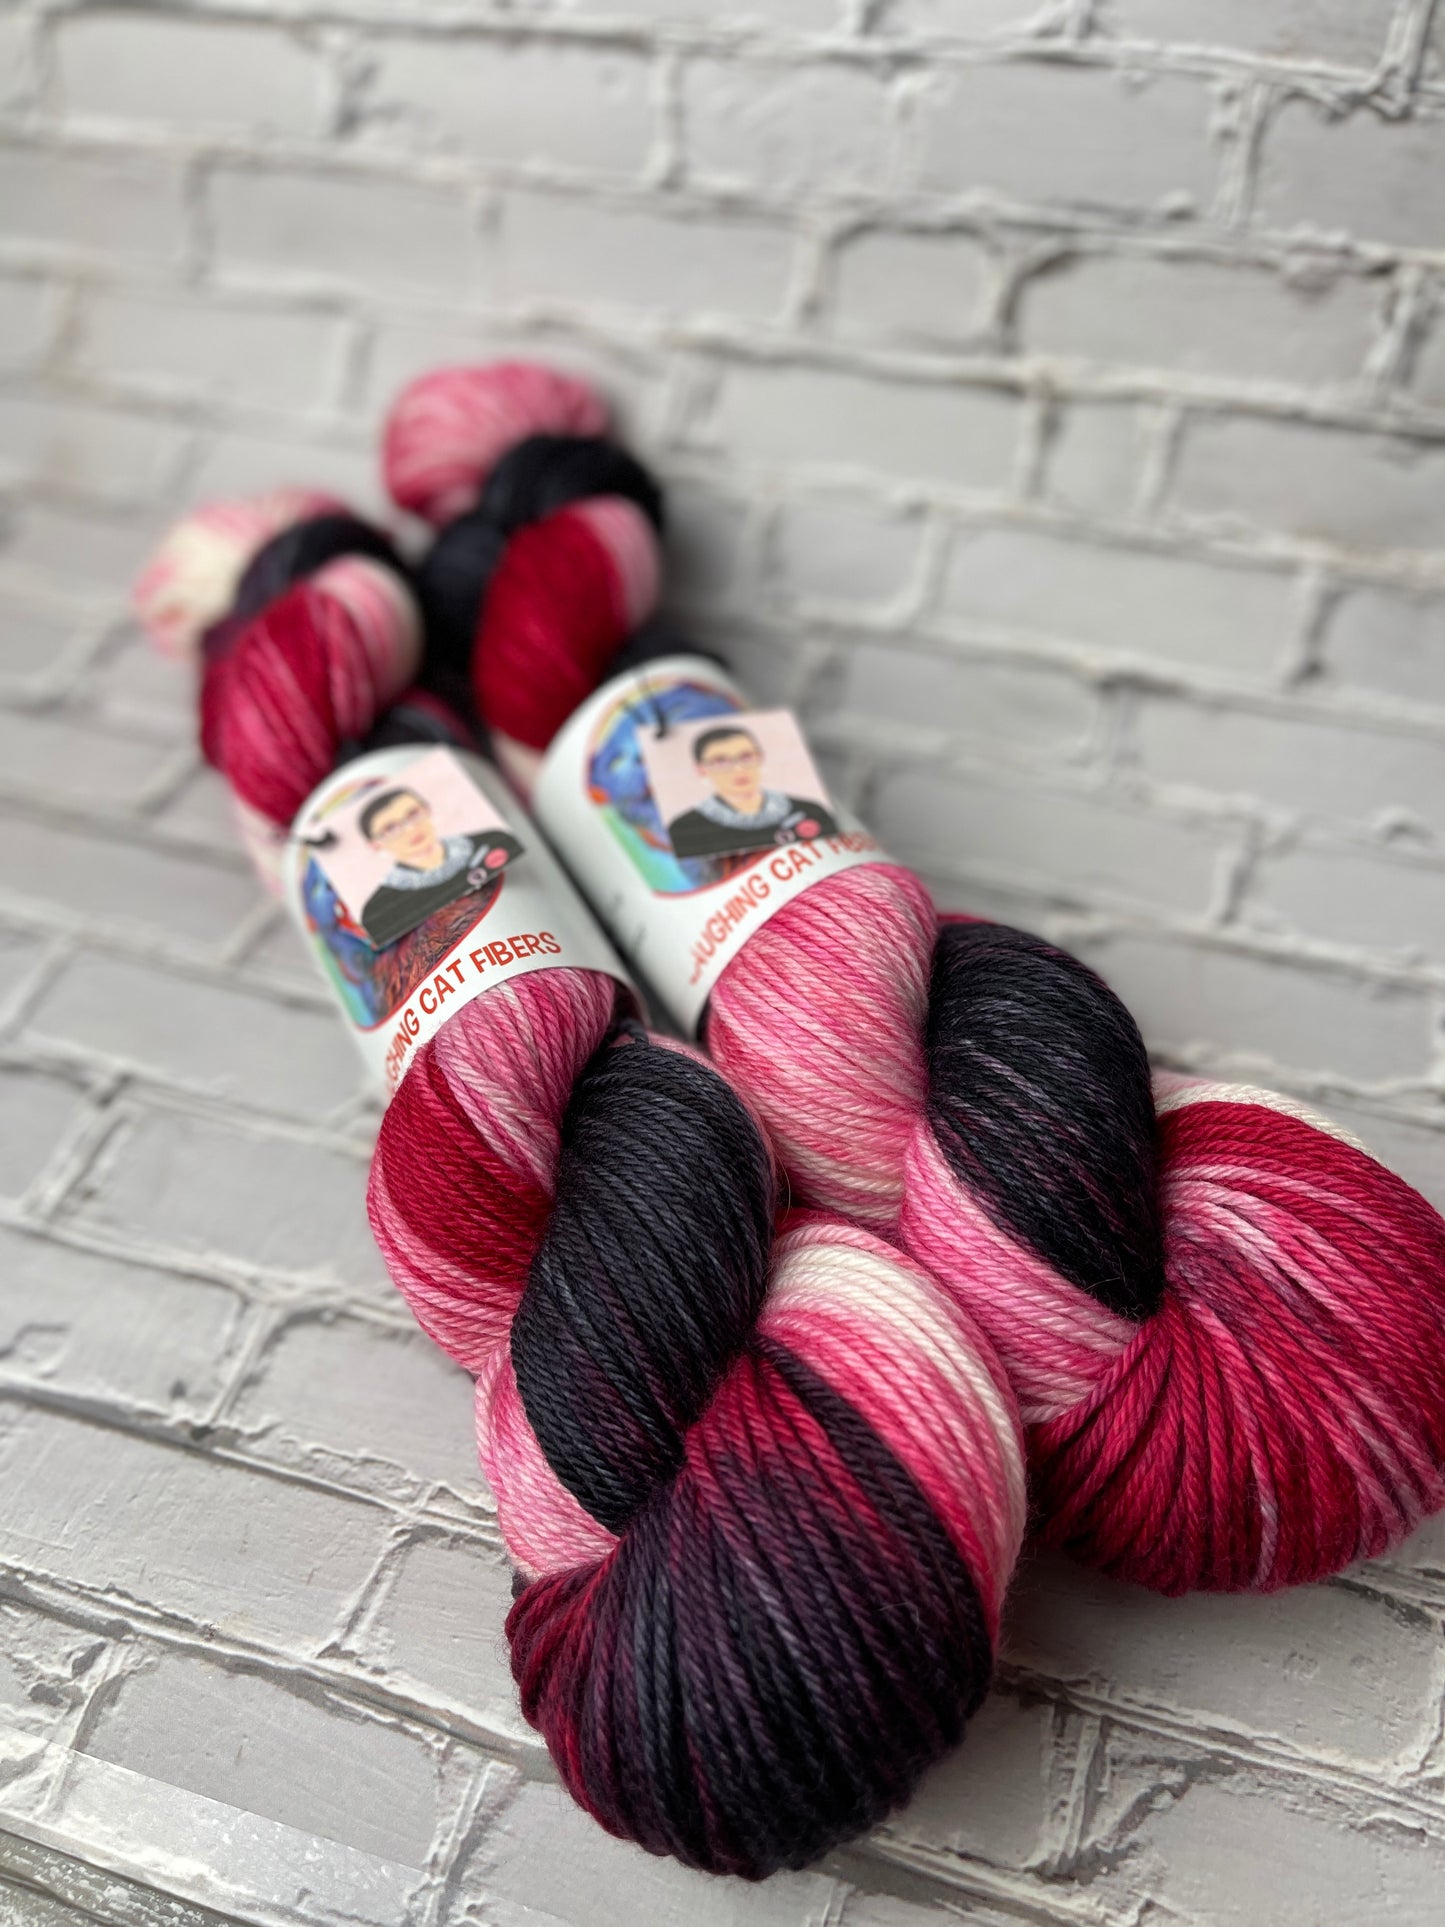 "Dissent" on Various Yarn Bases